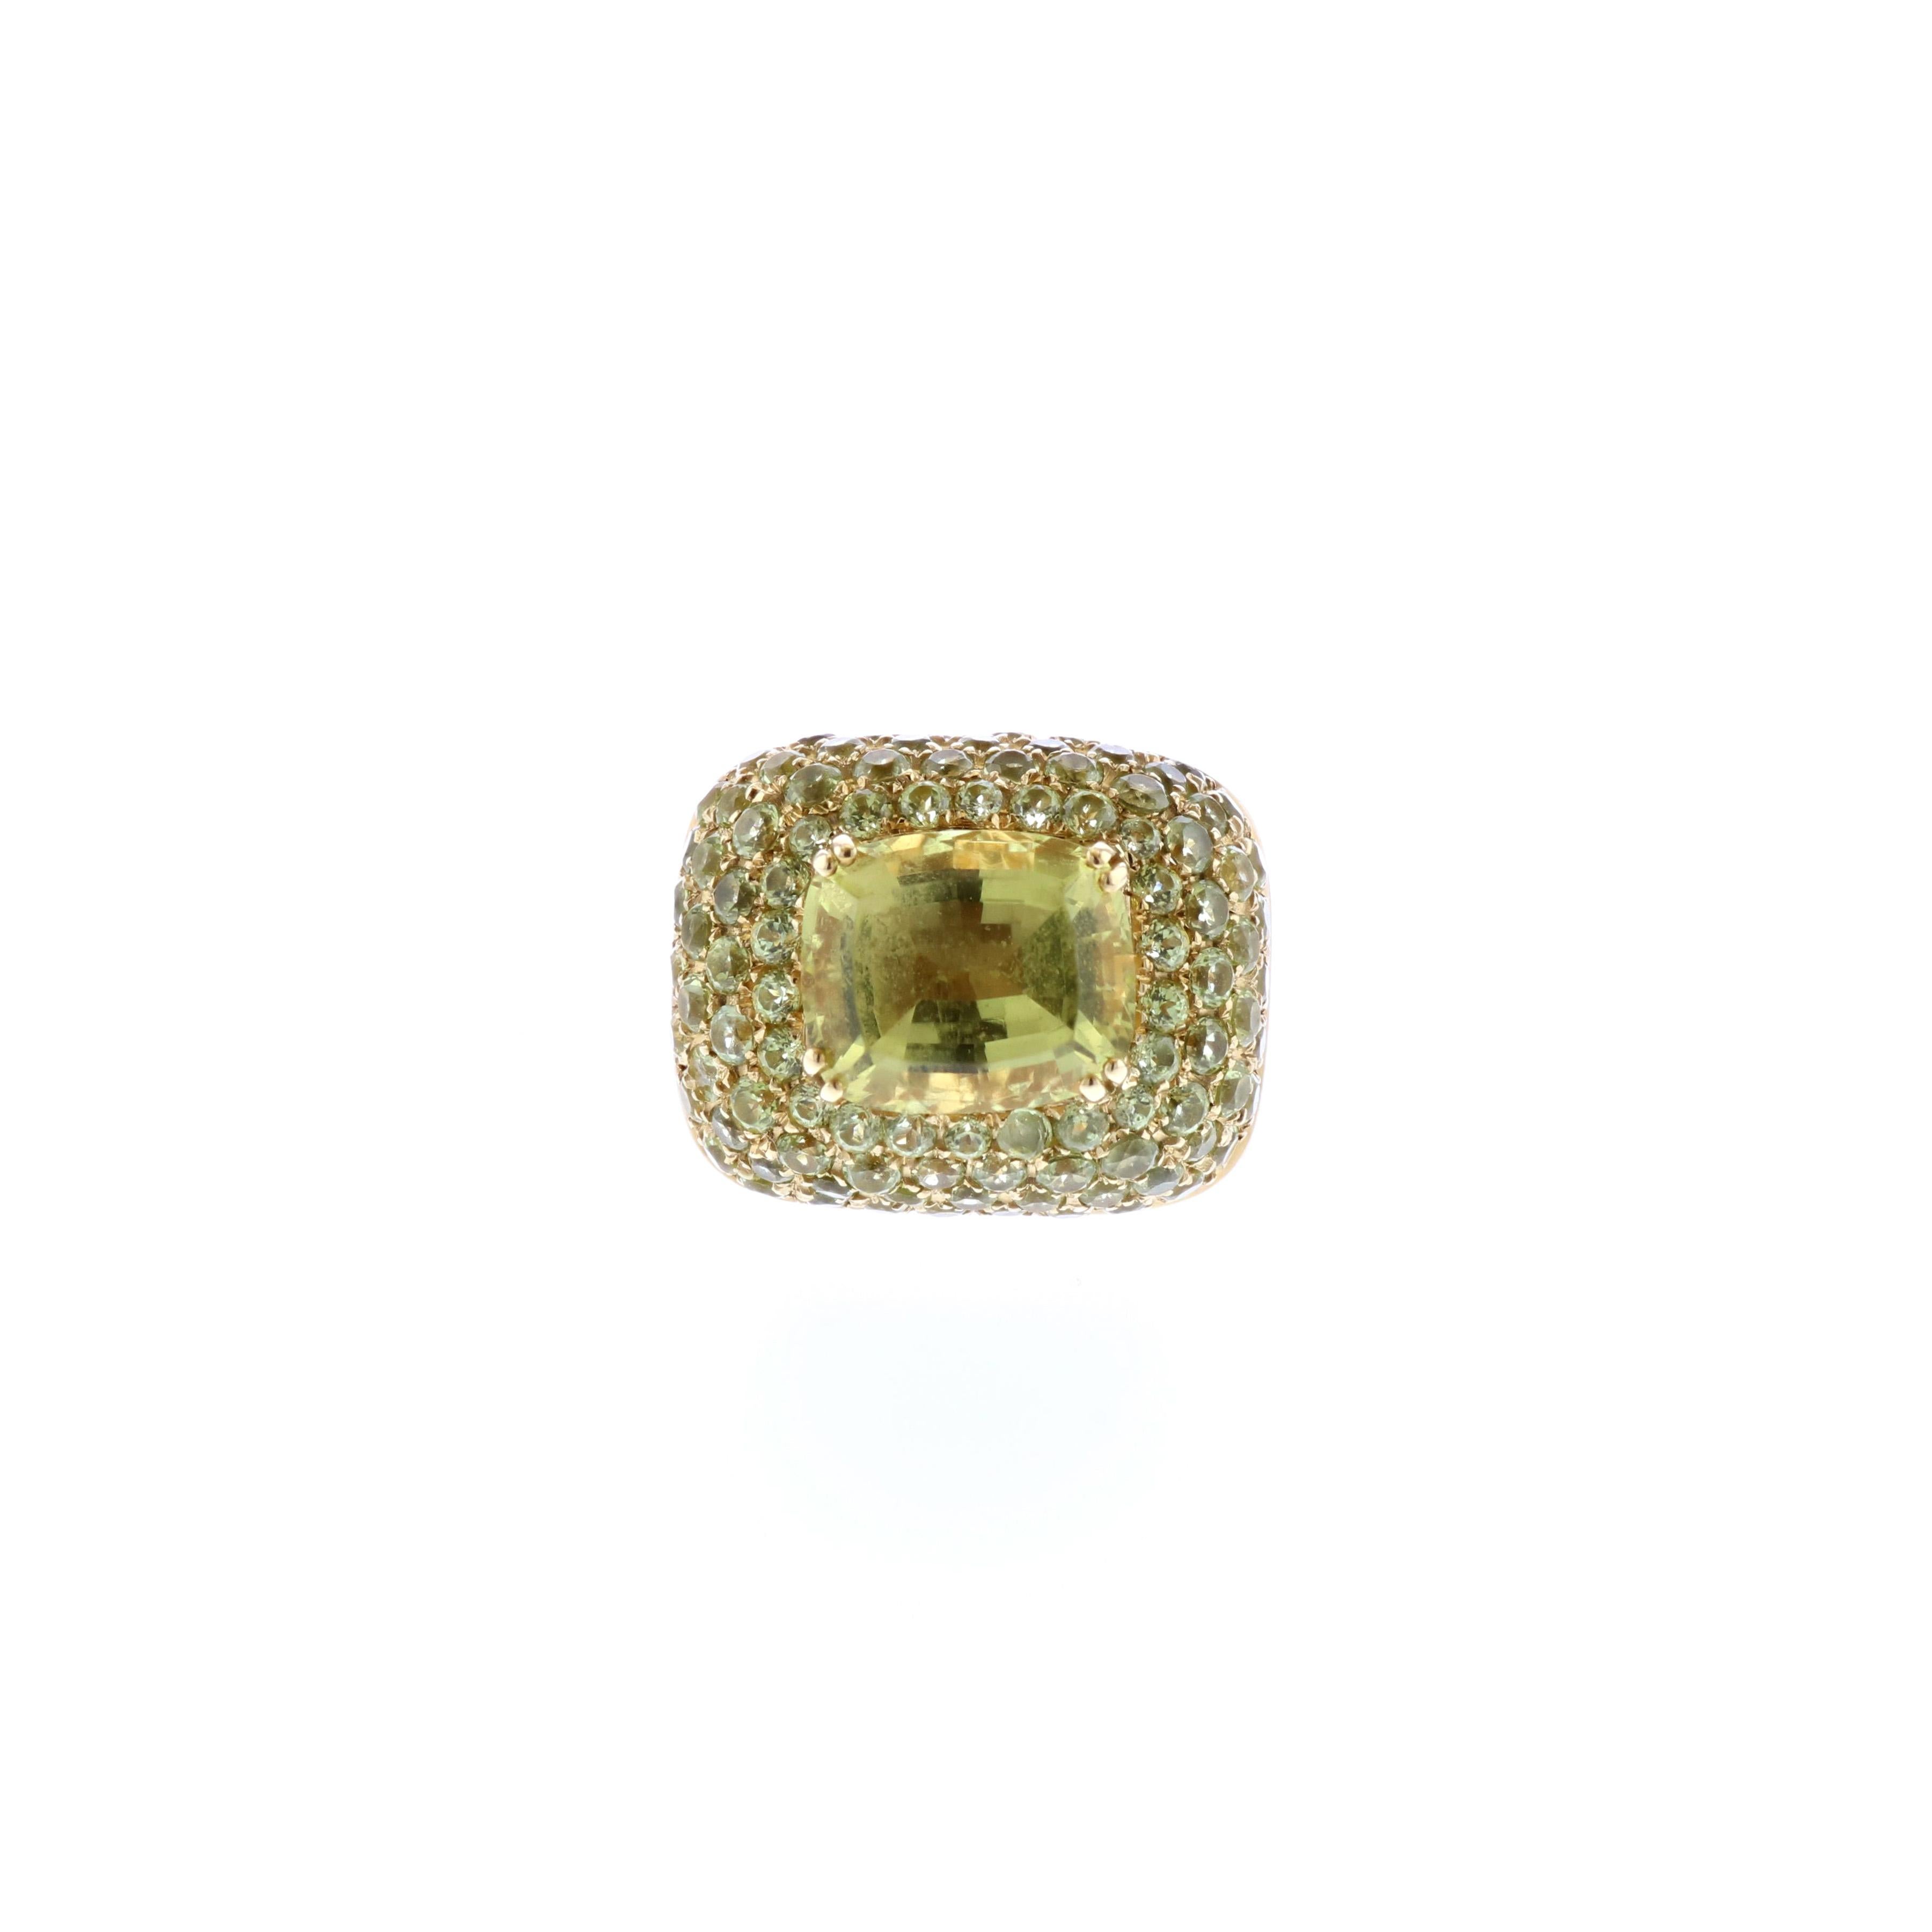 18K yellow gold ring with citrines.  The center stone is a cushion cut citrine weighing 4.65 carats.  Surrounding it are 100 round citrines with total carat weight of 2.25.  The ring is currently a size 7.  Measures 1-1/16